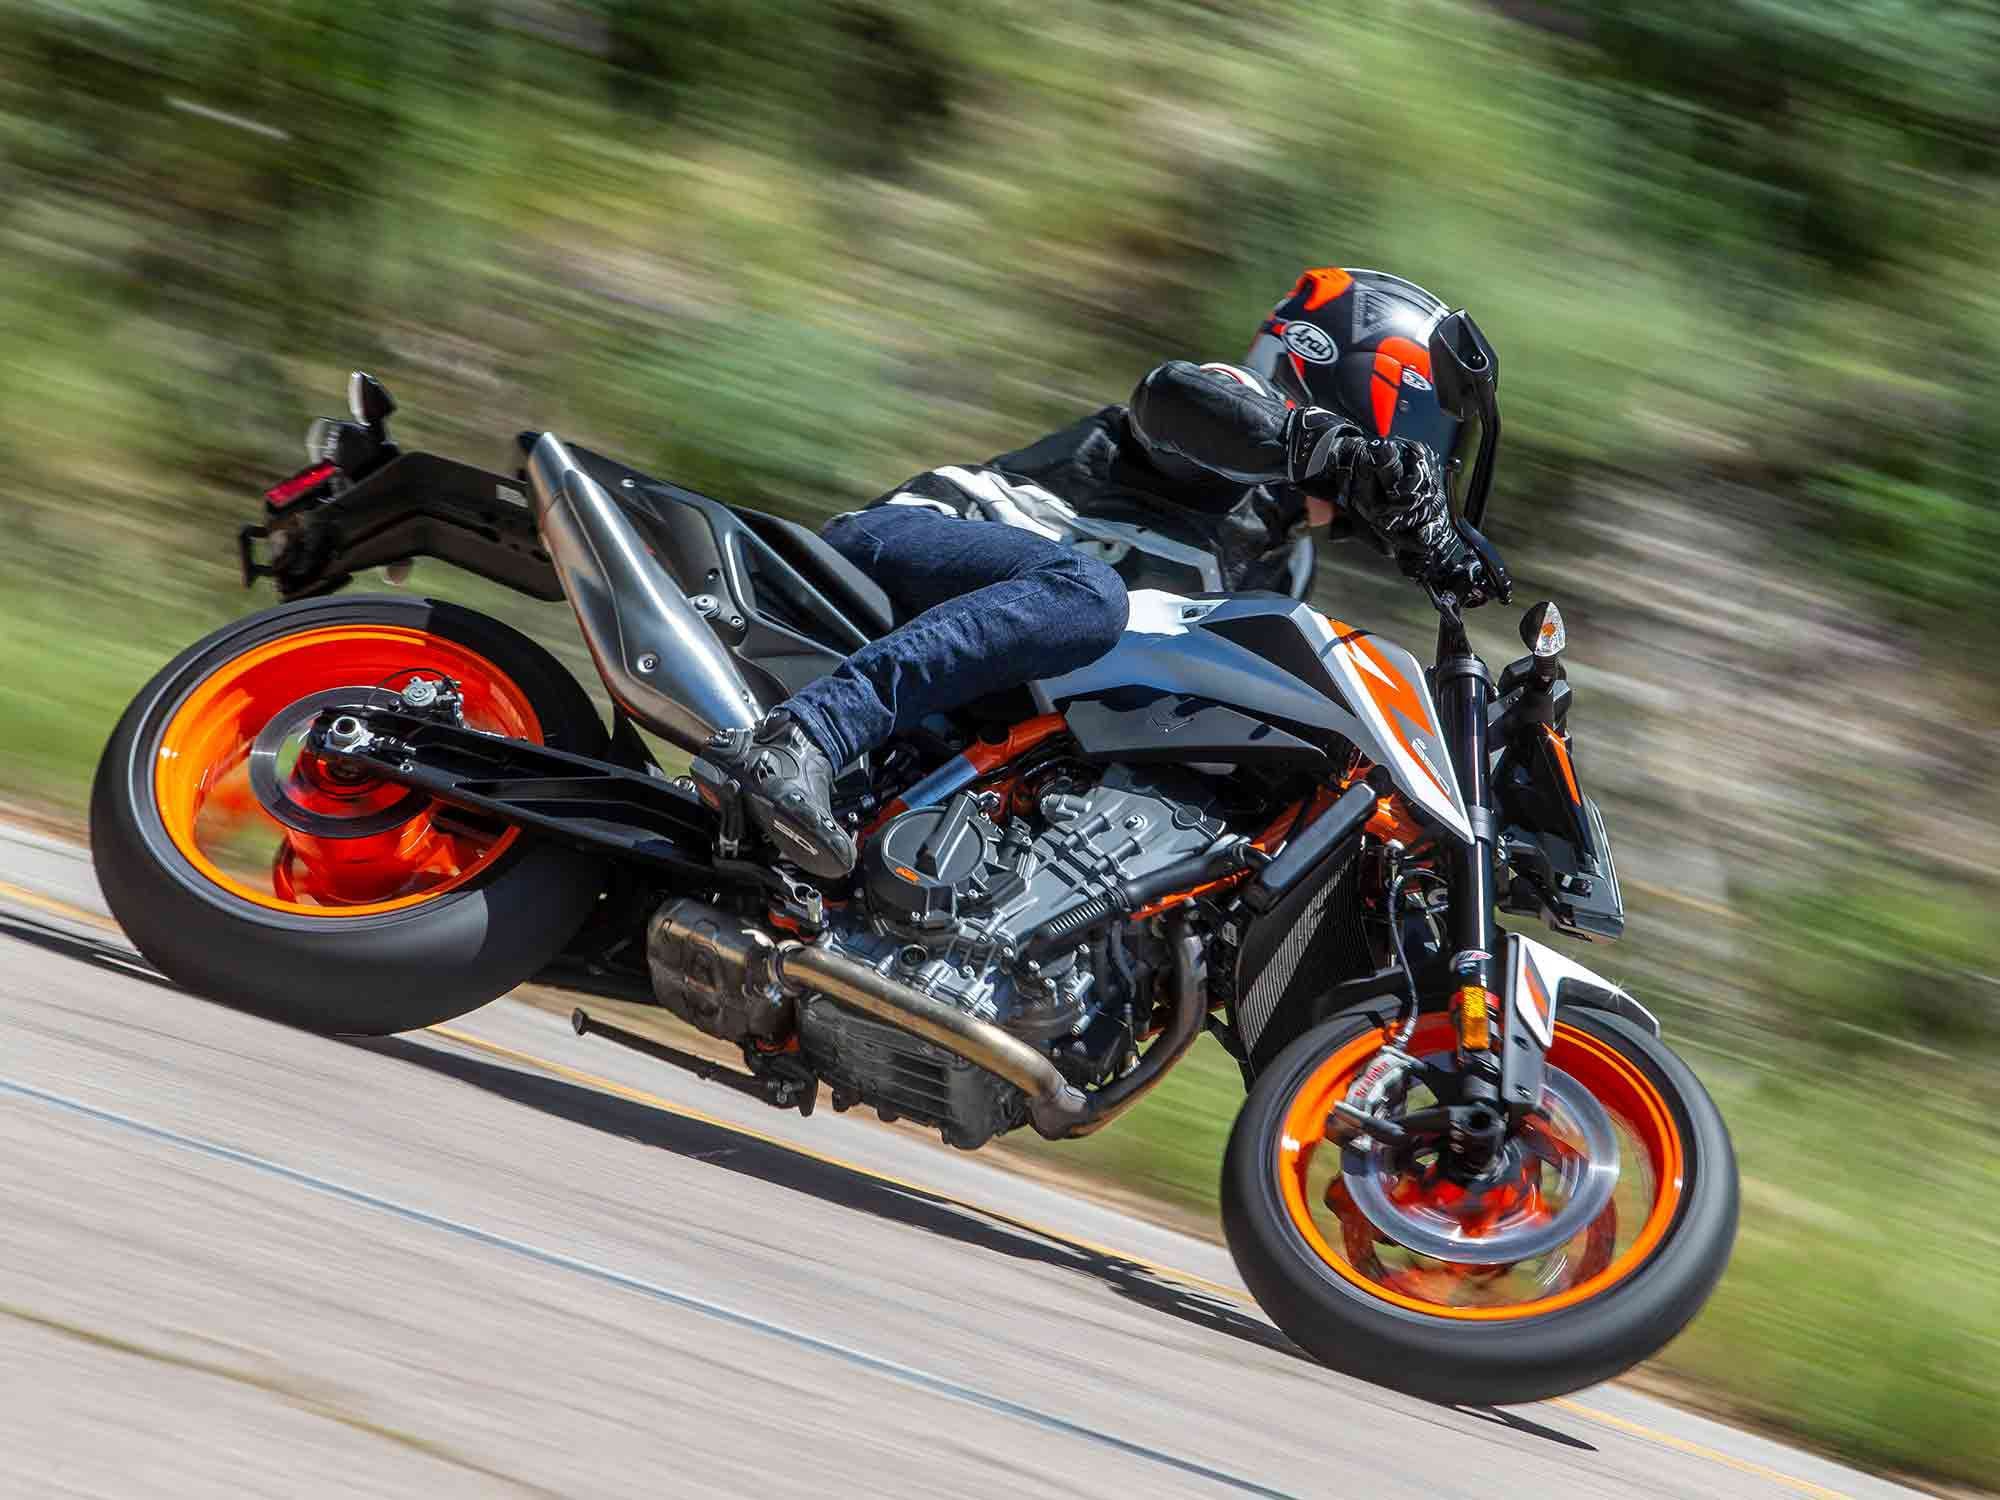 KTM’s 890 Duke R turned up the performance and fun from the 790 Duke with top-shelf parts and more power.